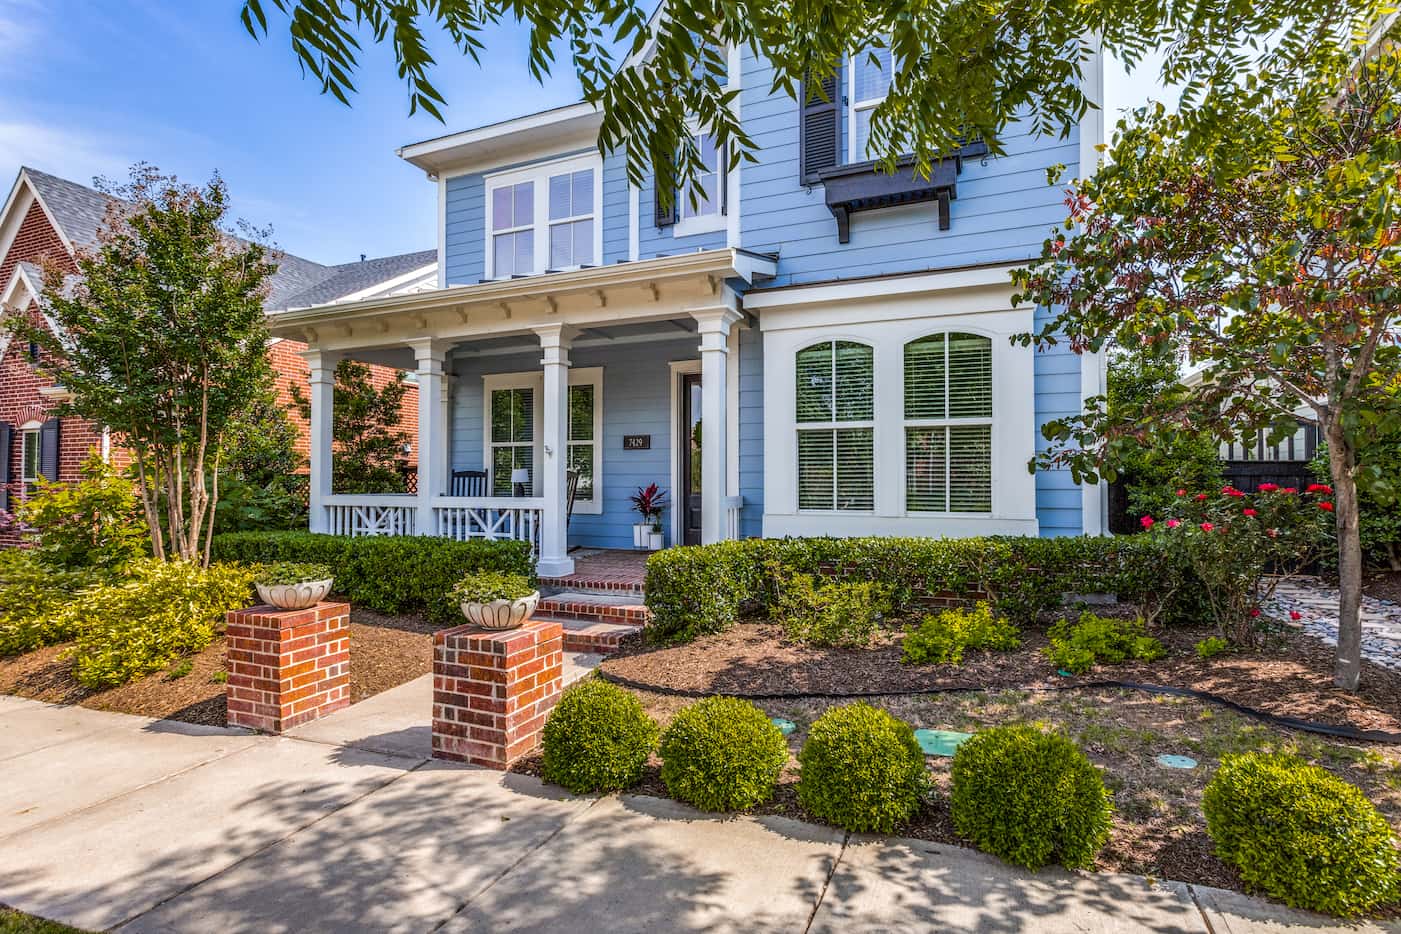 The charming blue home is tucked into the Tucker Hill neighborhood in McKinney.